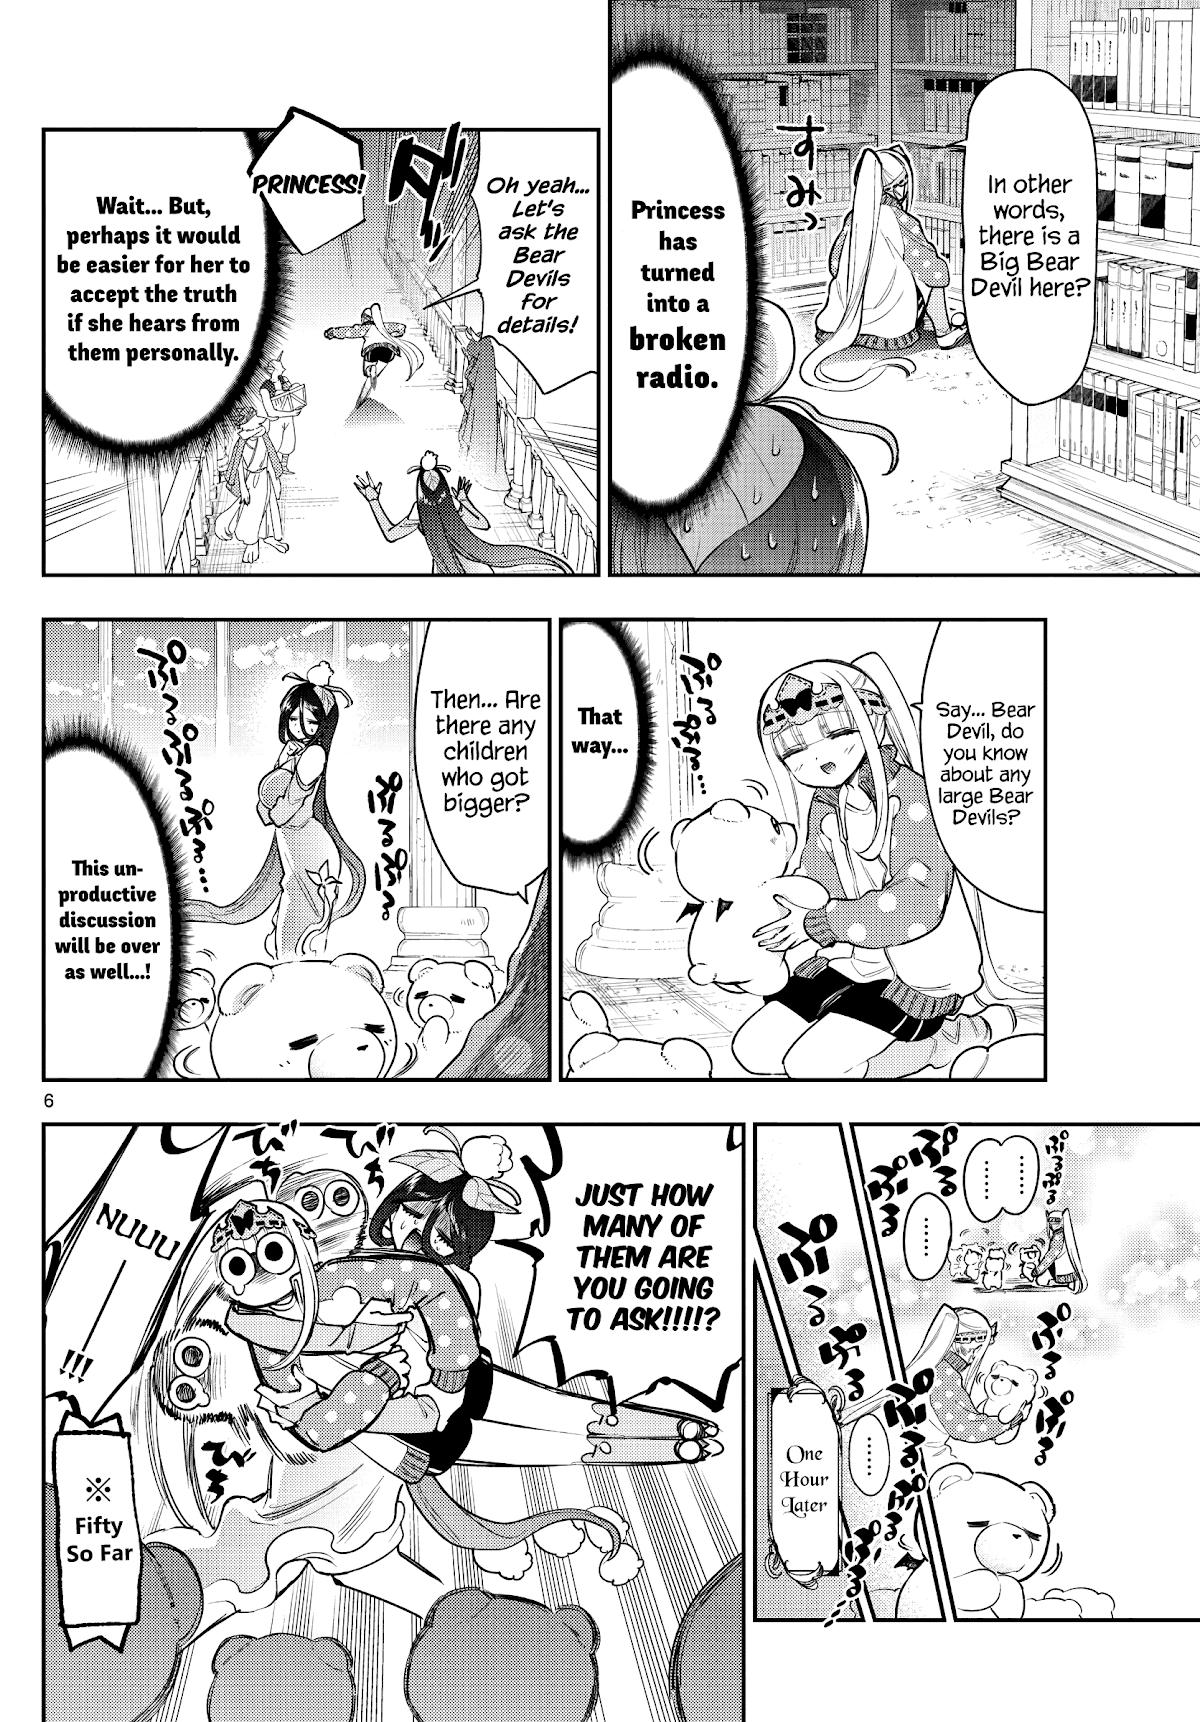 Maou-Jou De Oyasumi Chapter 262: Does That Mean There Is A Big Bear Devil? page 6 - Mangakakalot